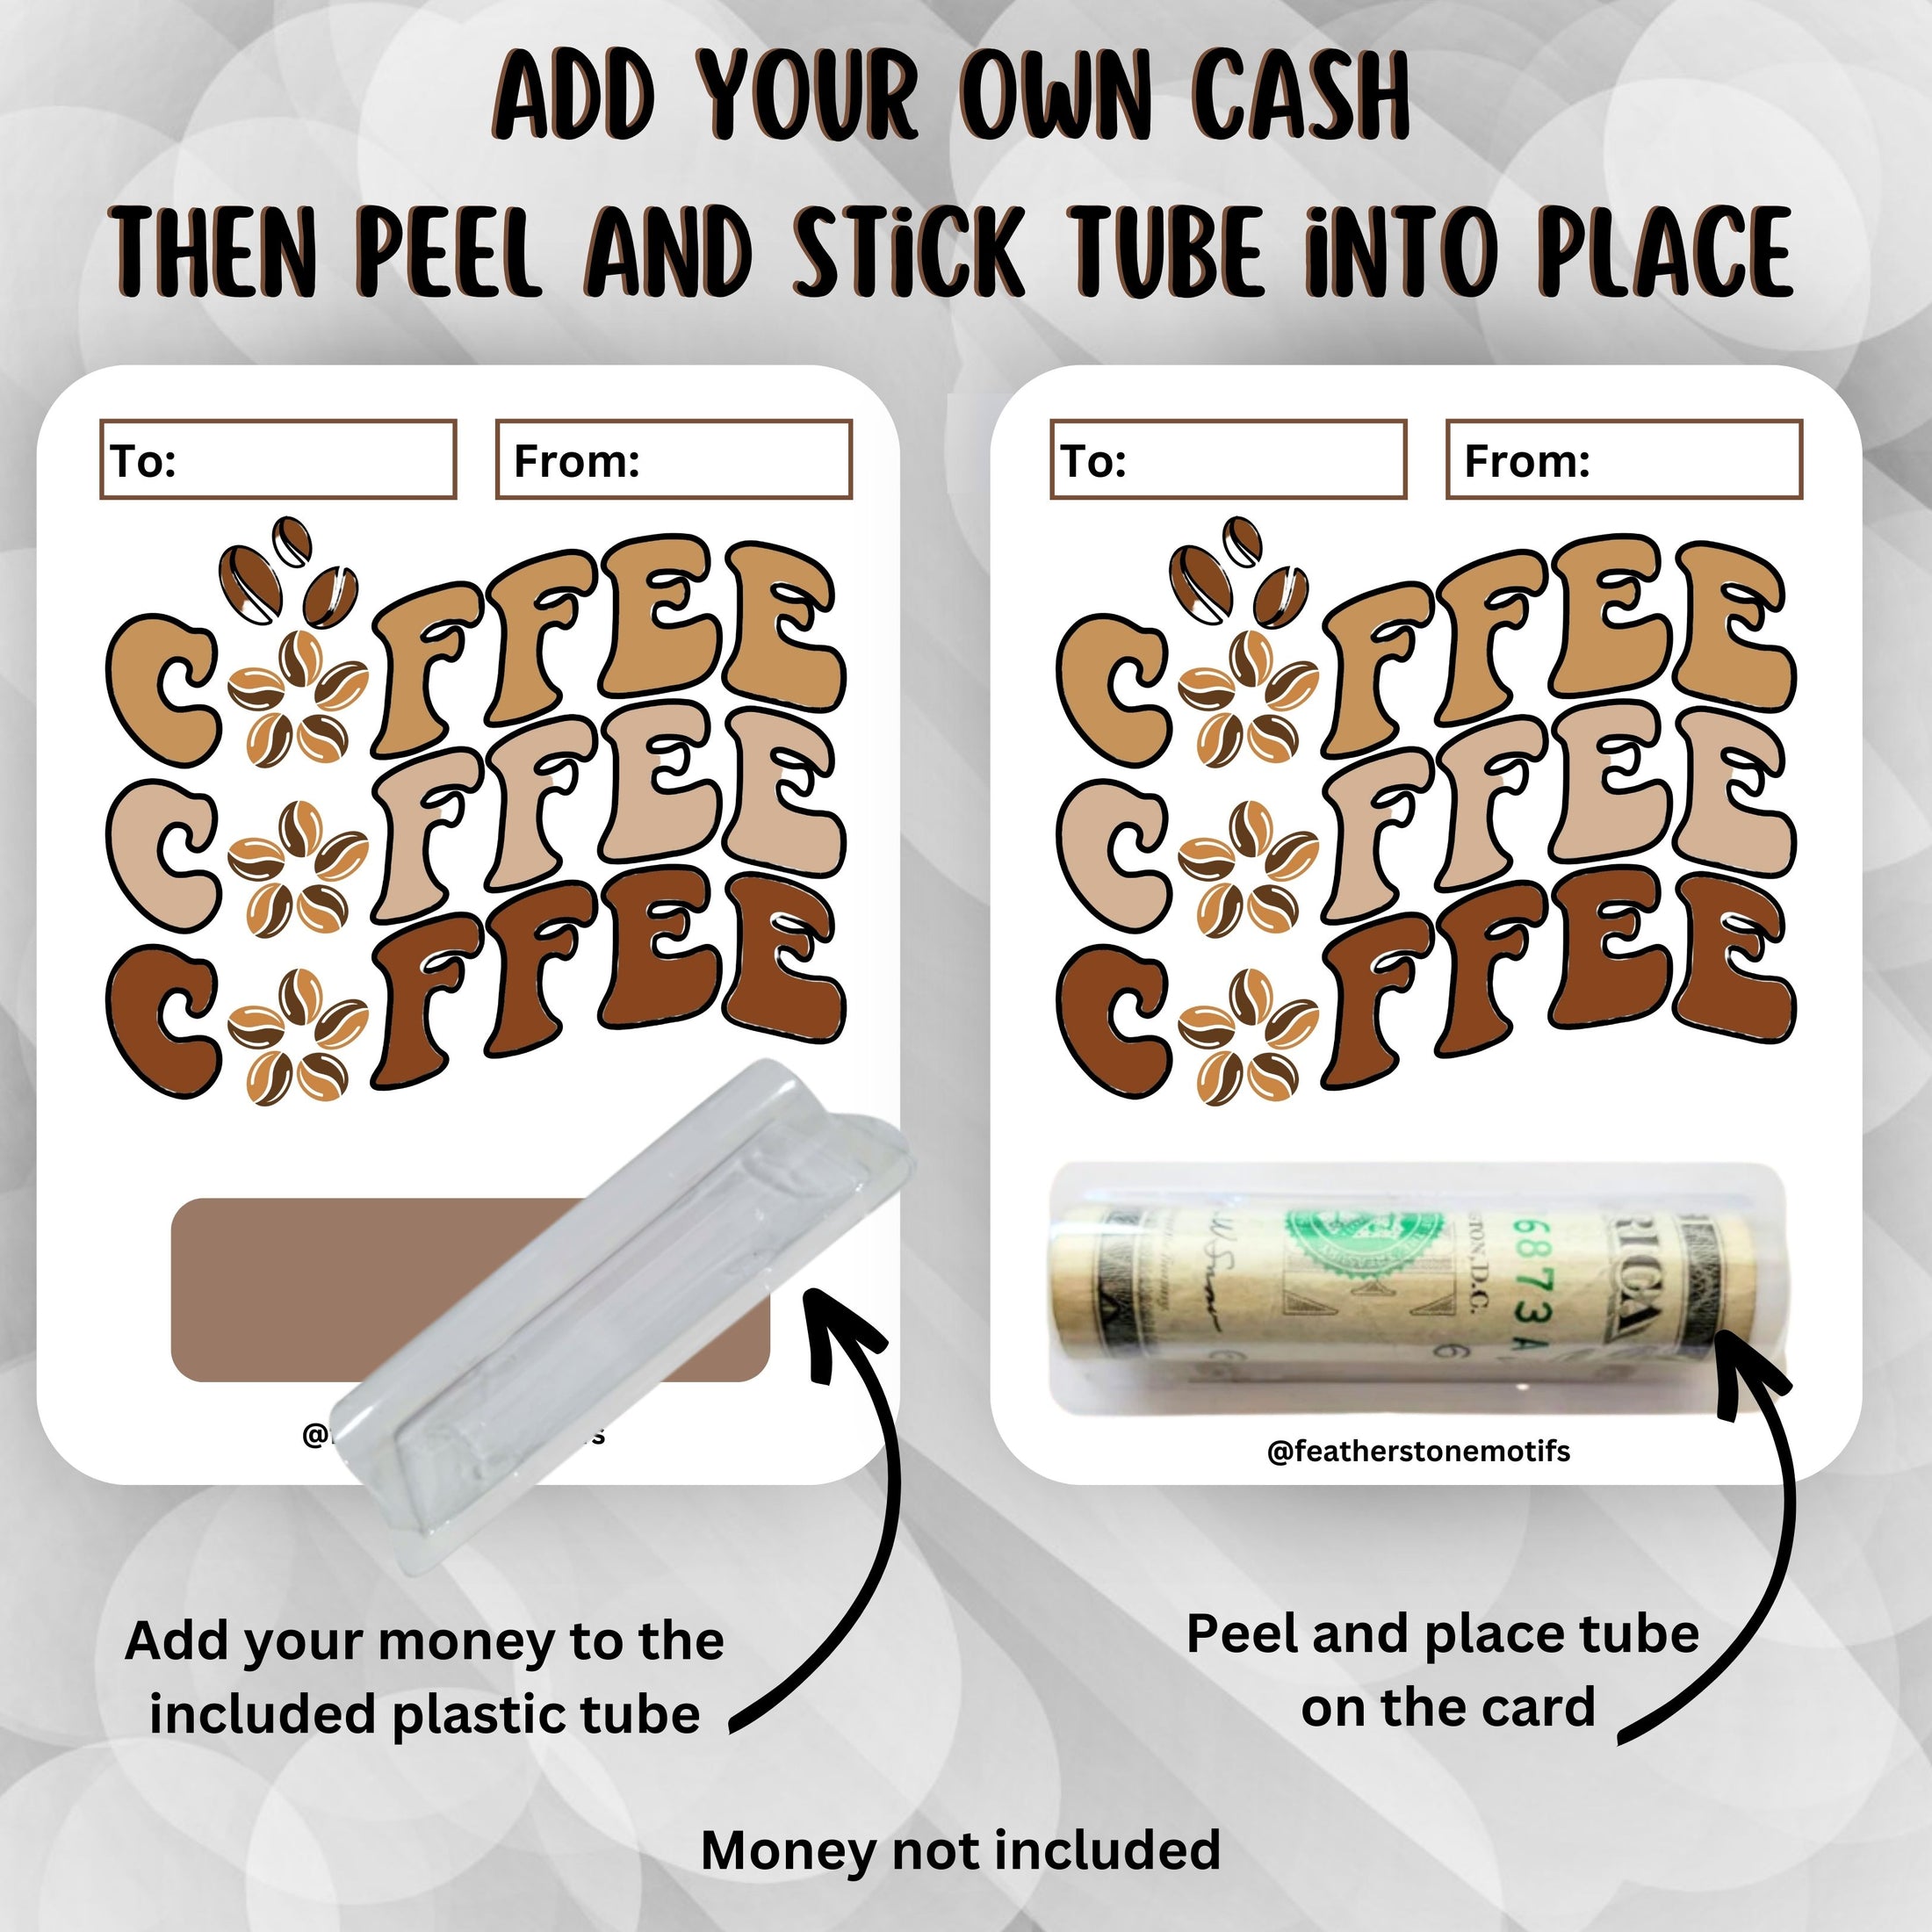 This image shows how to attach the money tube to the Coffee Money Card.